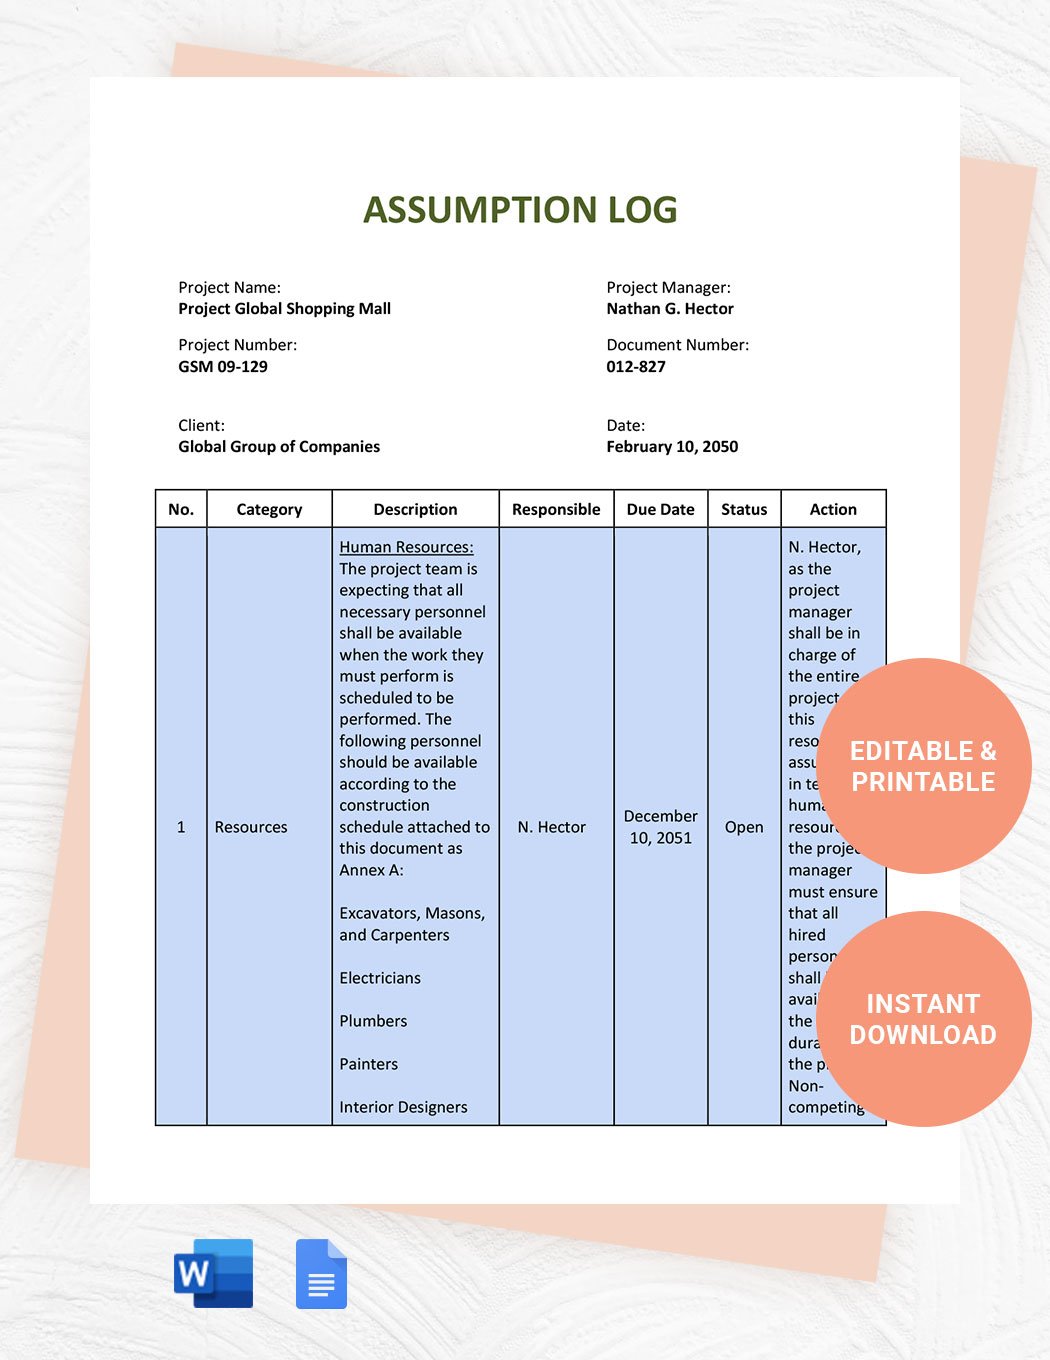 Assumptions Tracking Log Template in Word, Google Docs